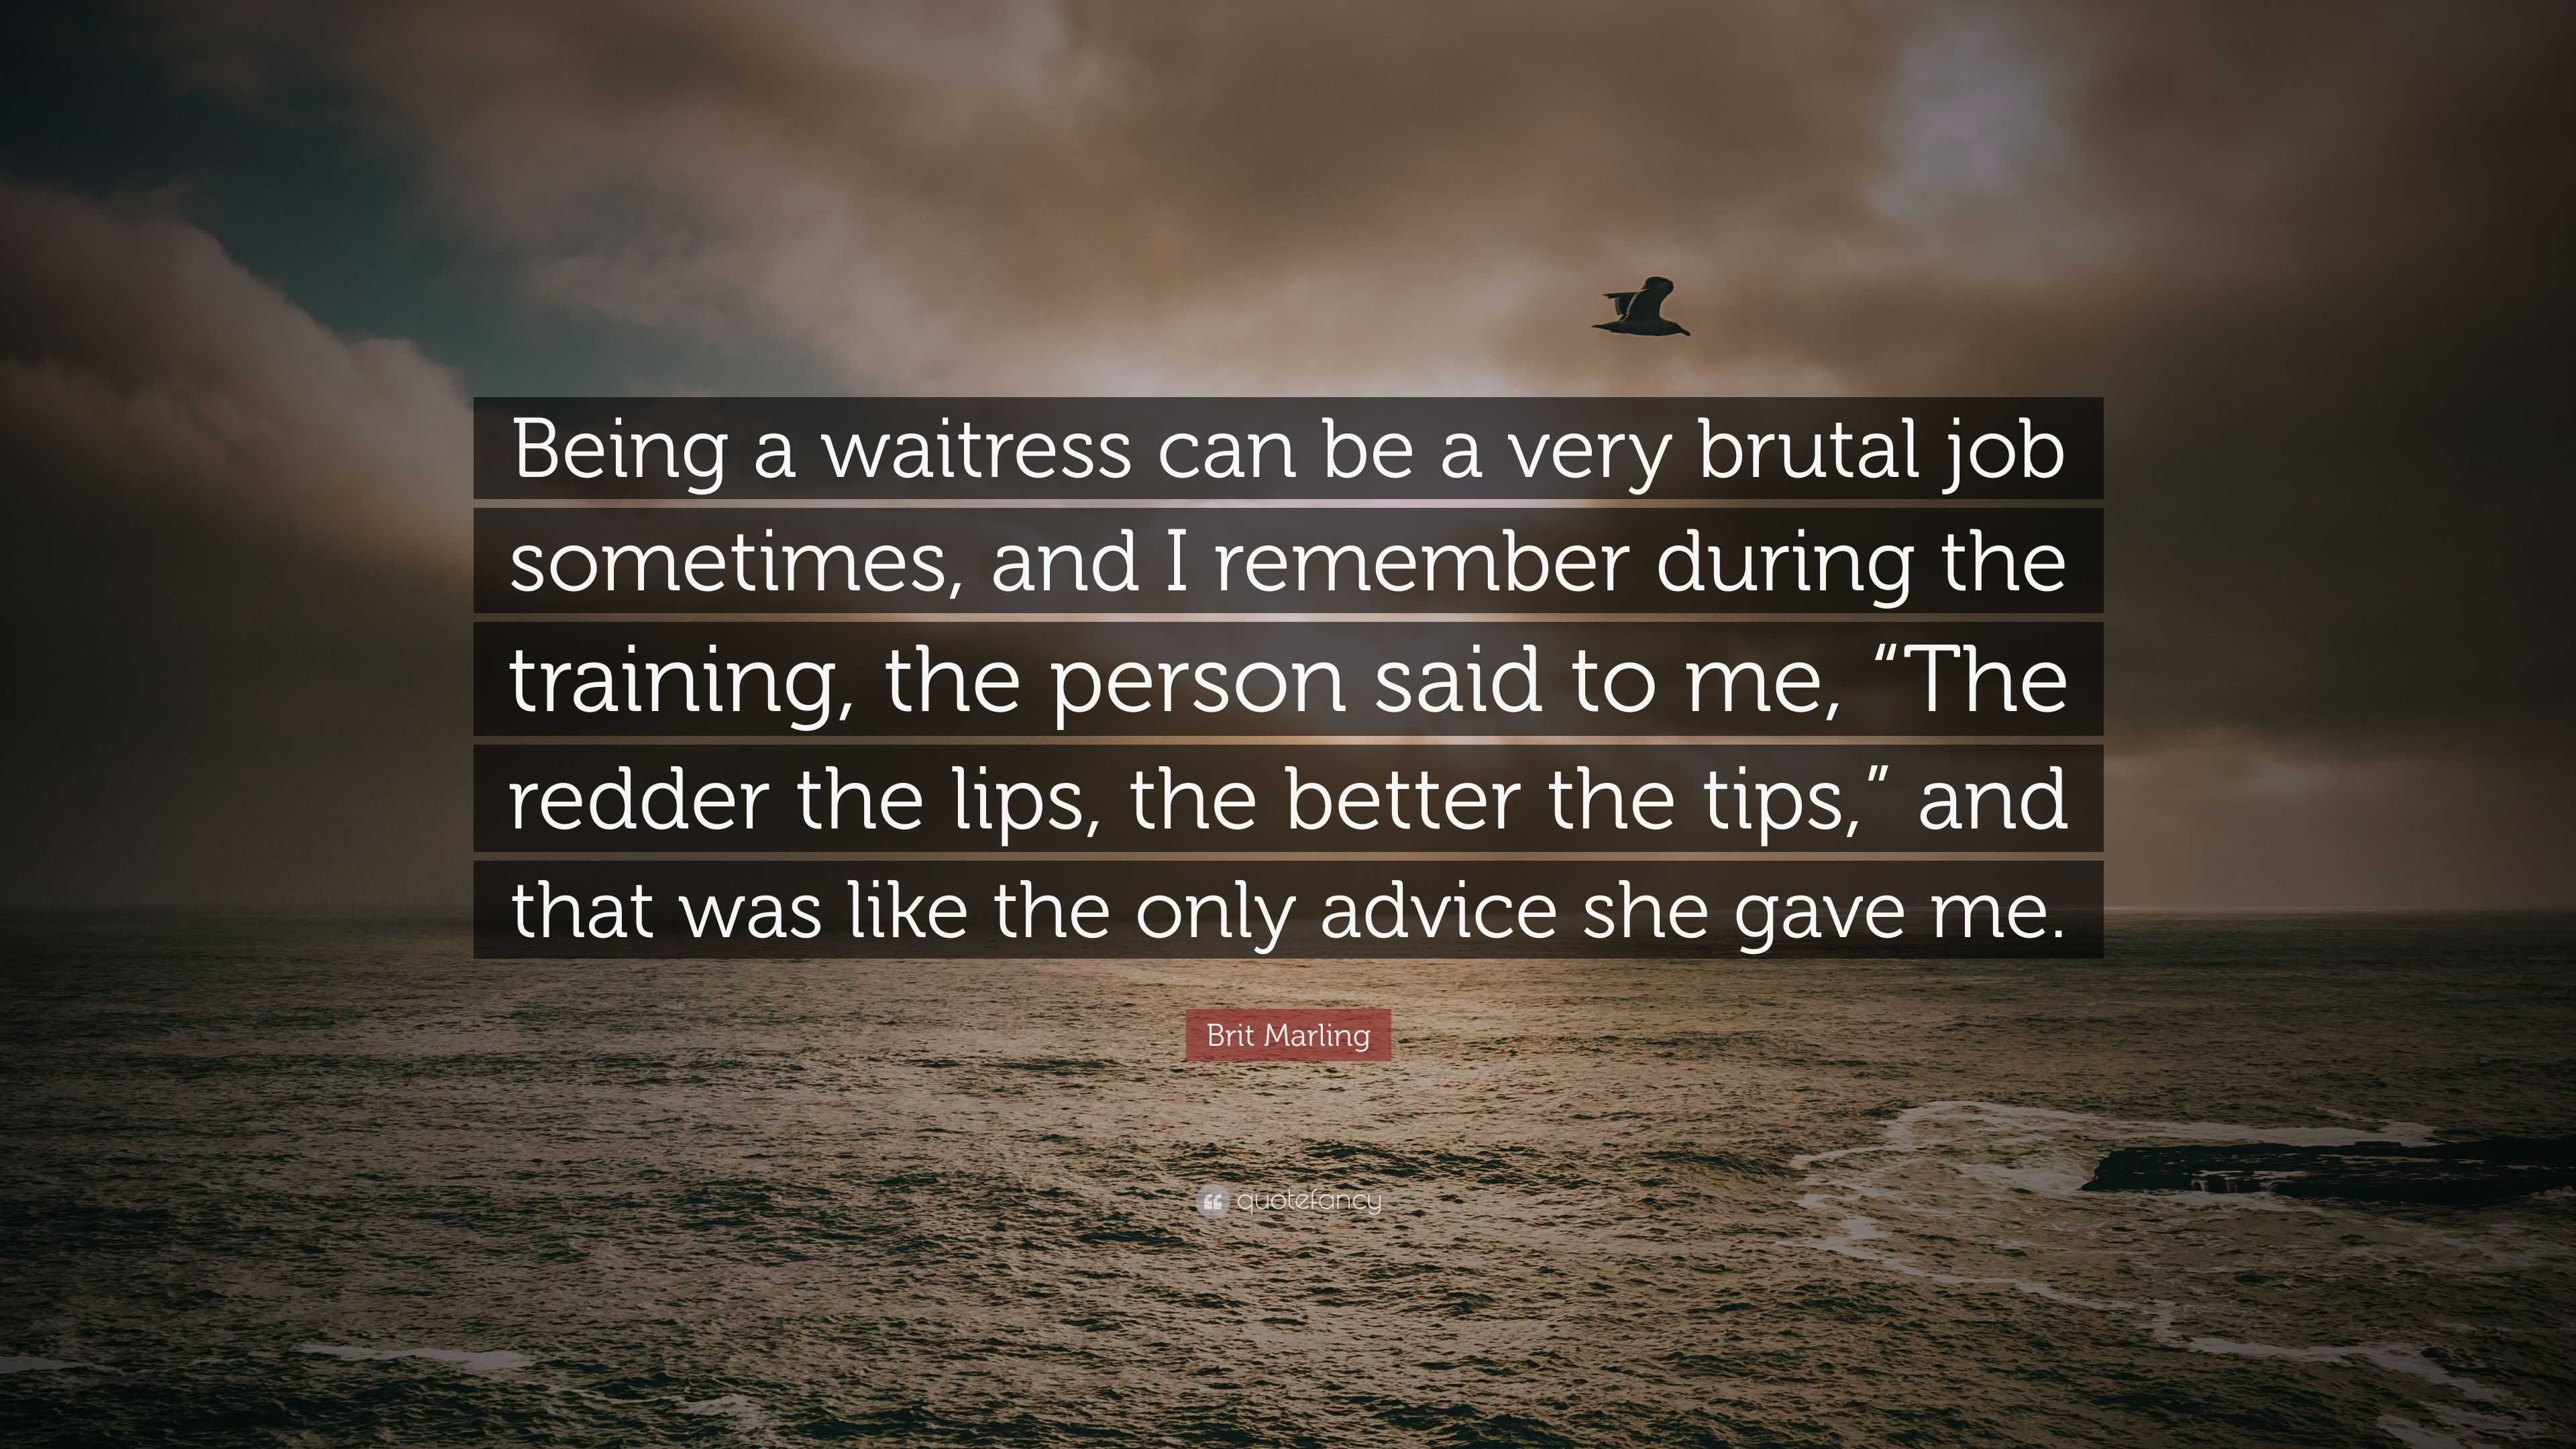 Brit Marling Quote: “Being a waitress can be a very brutal job sometimes, and remember during the training, the person said to me, “The red...”